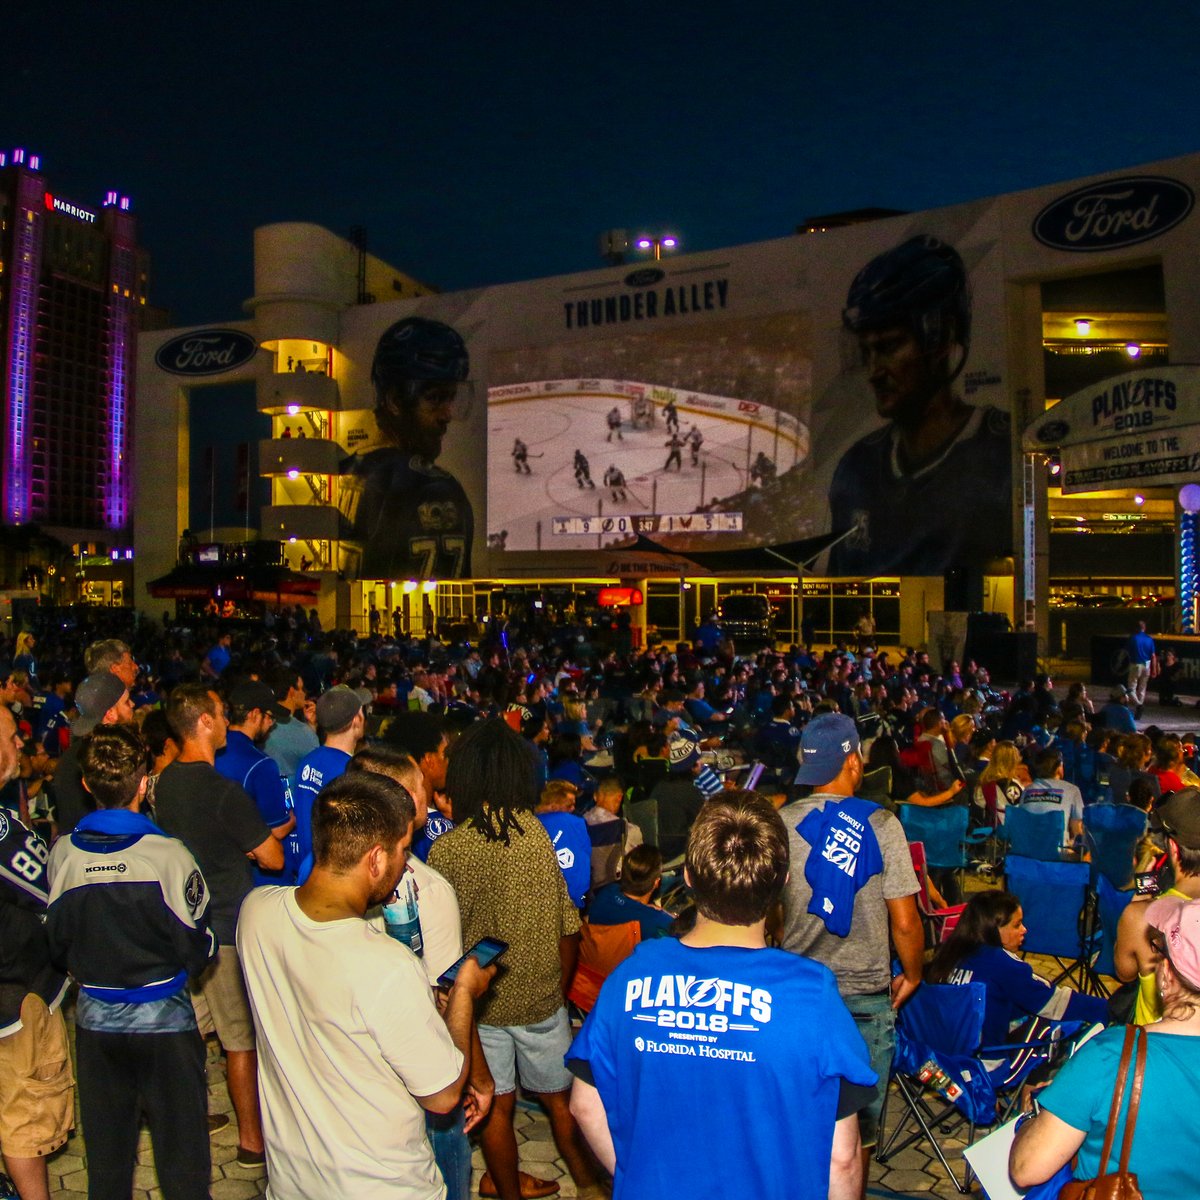 Lightning fans stock up on playoff apparel